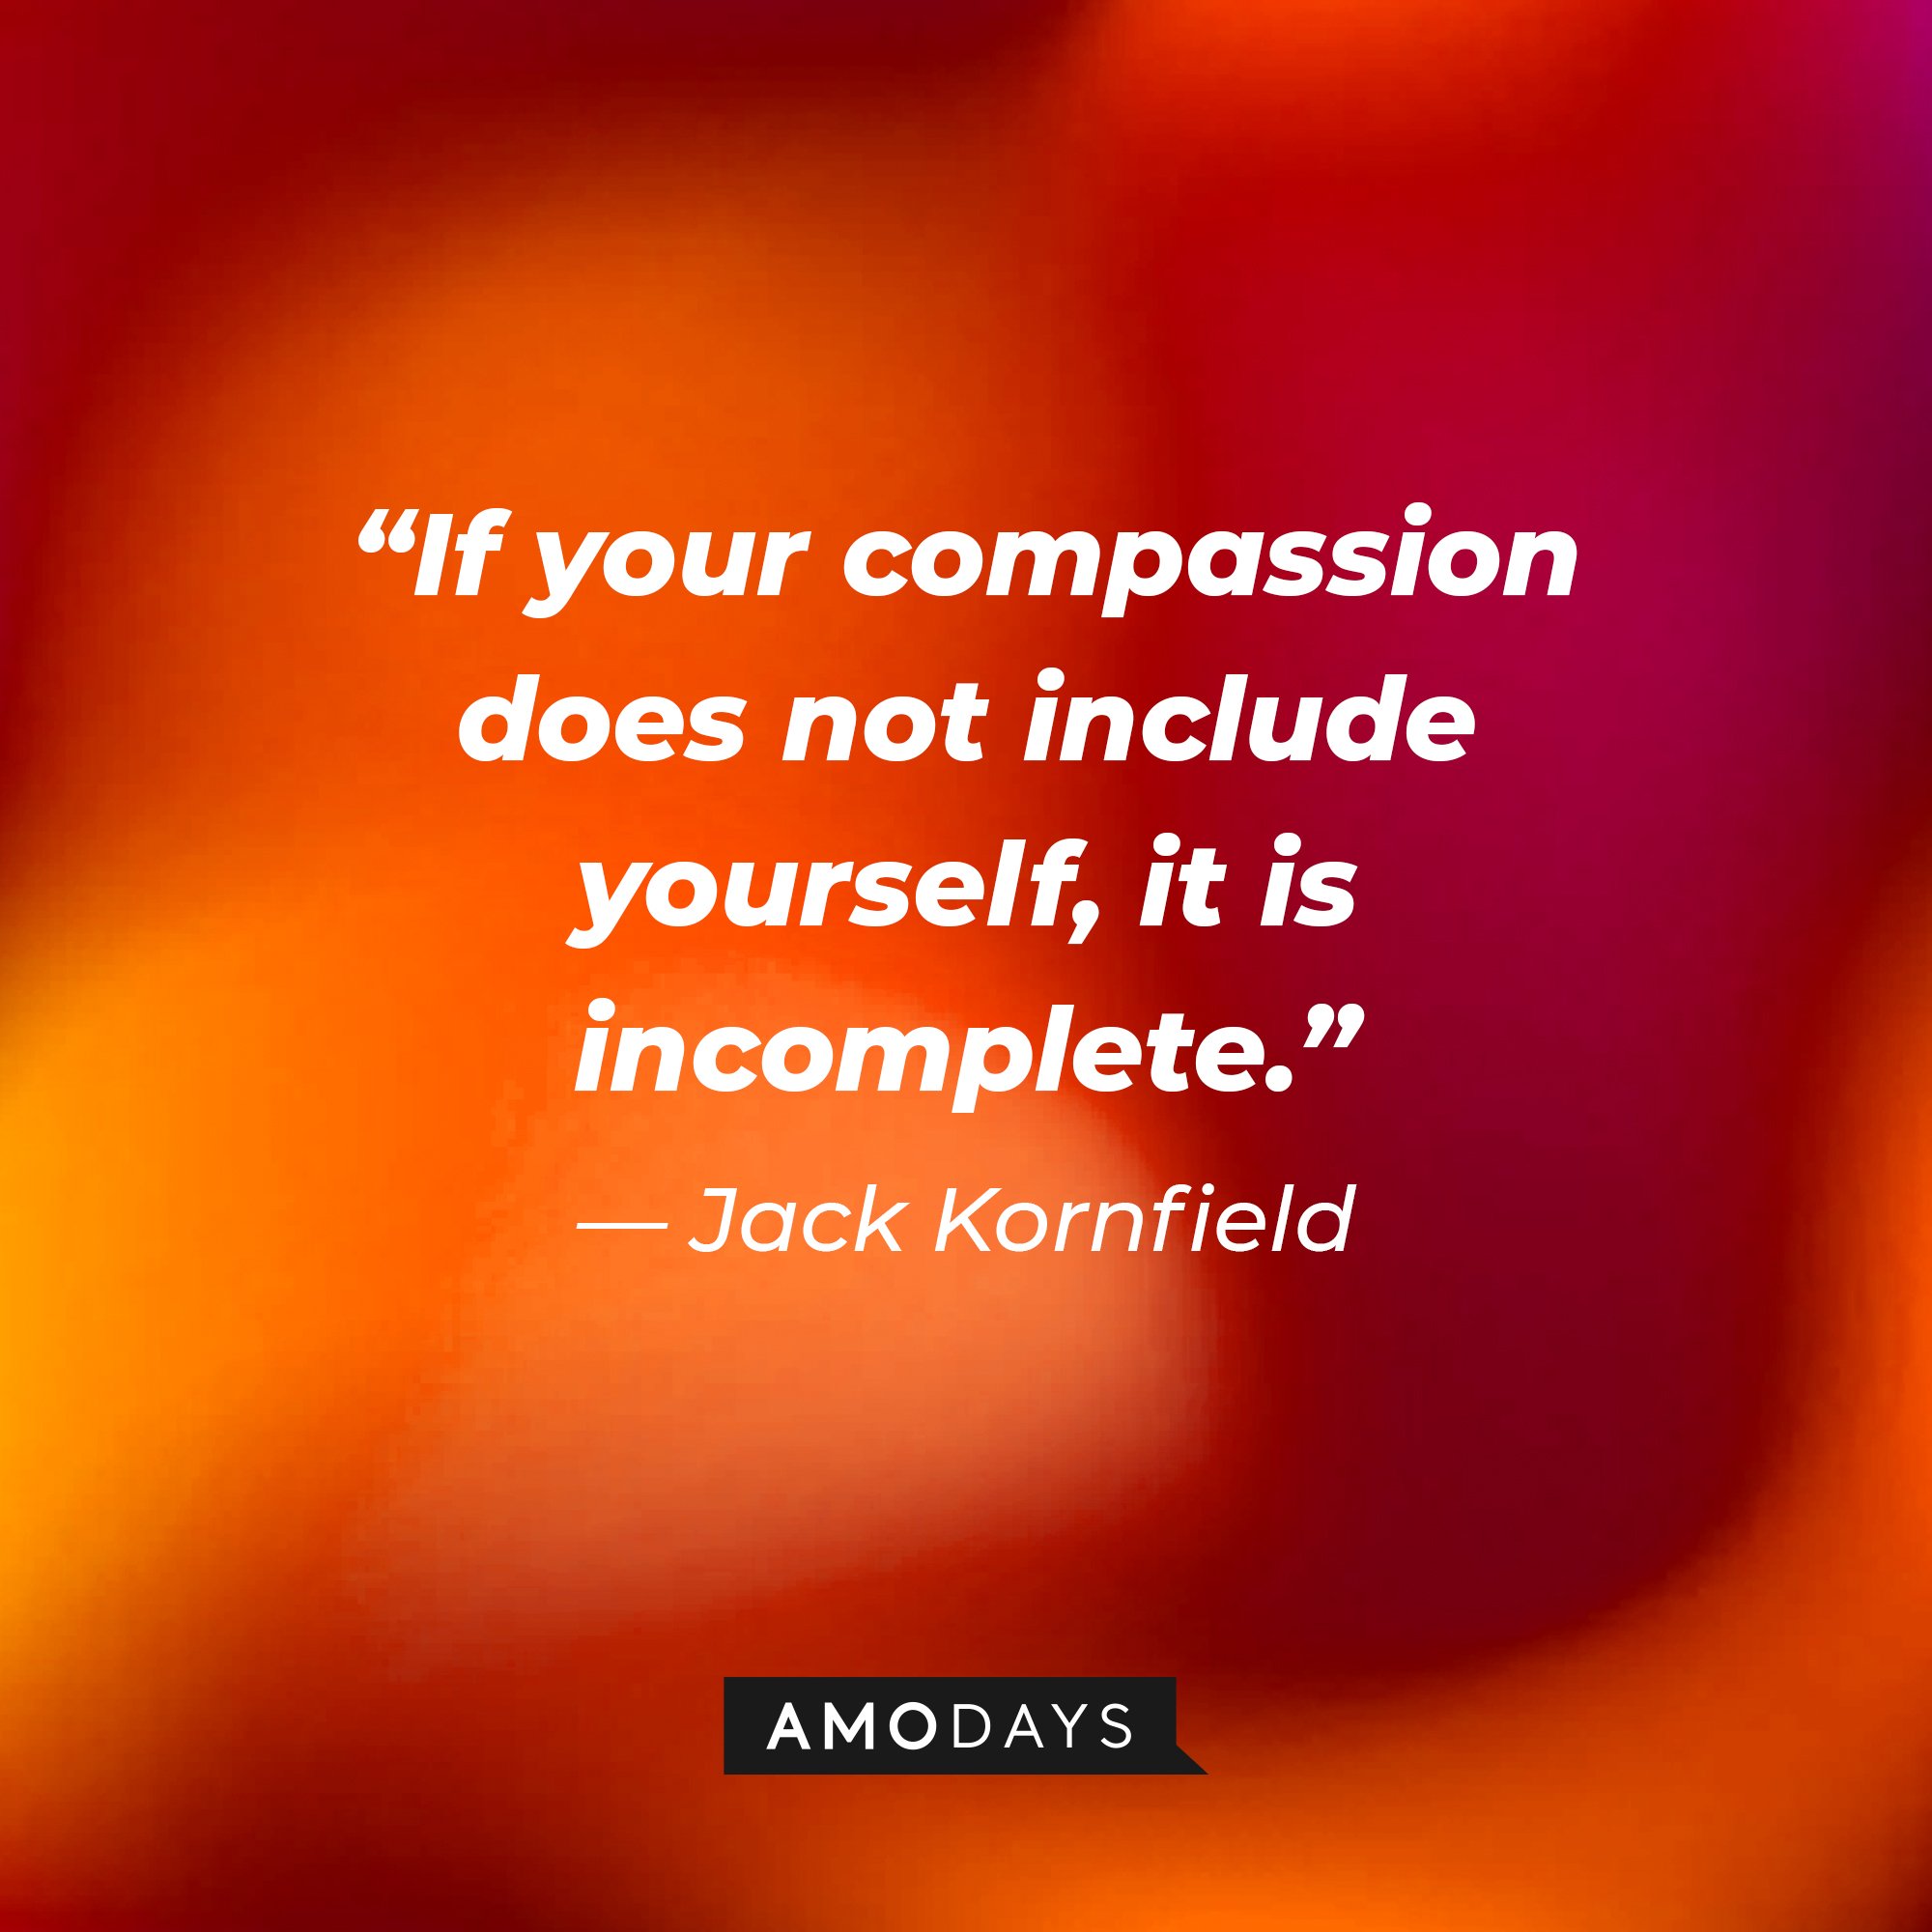 Jack Kornfield's quote: “If your compassion does not include yourself, it is incomplete.” | Image: AmoDays